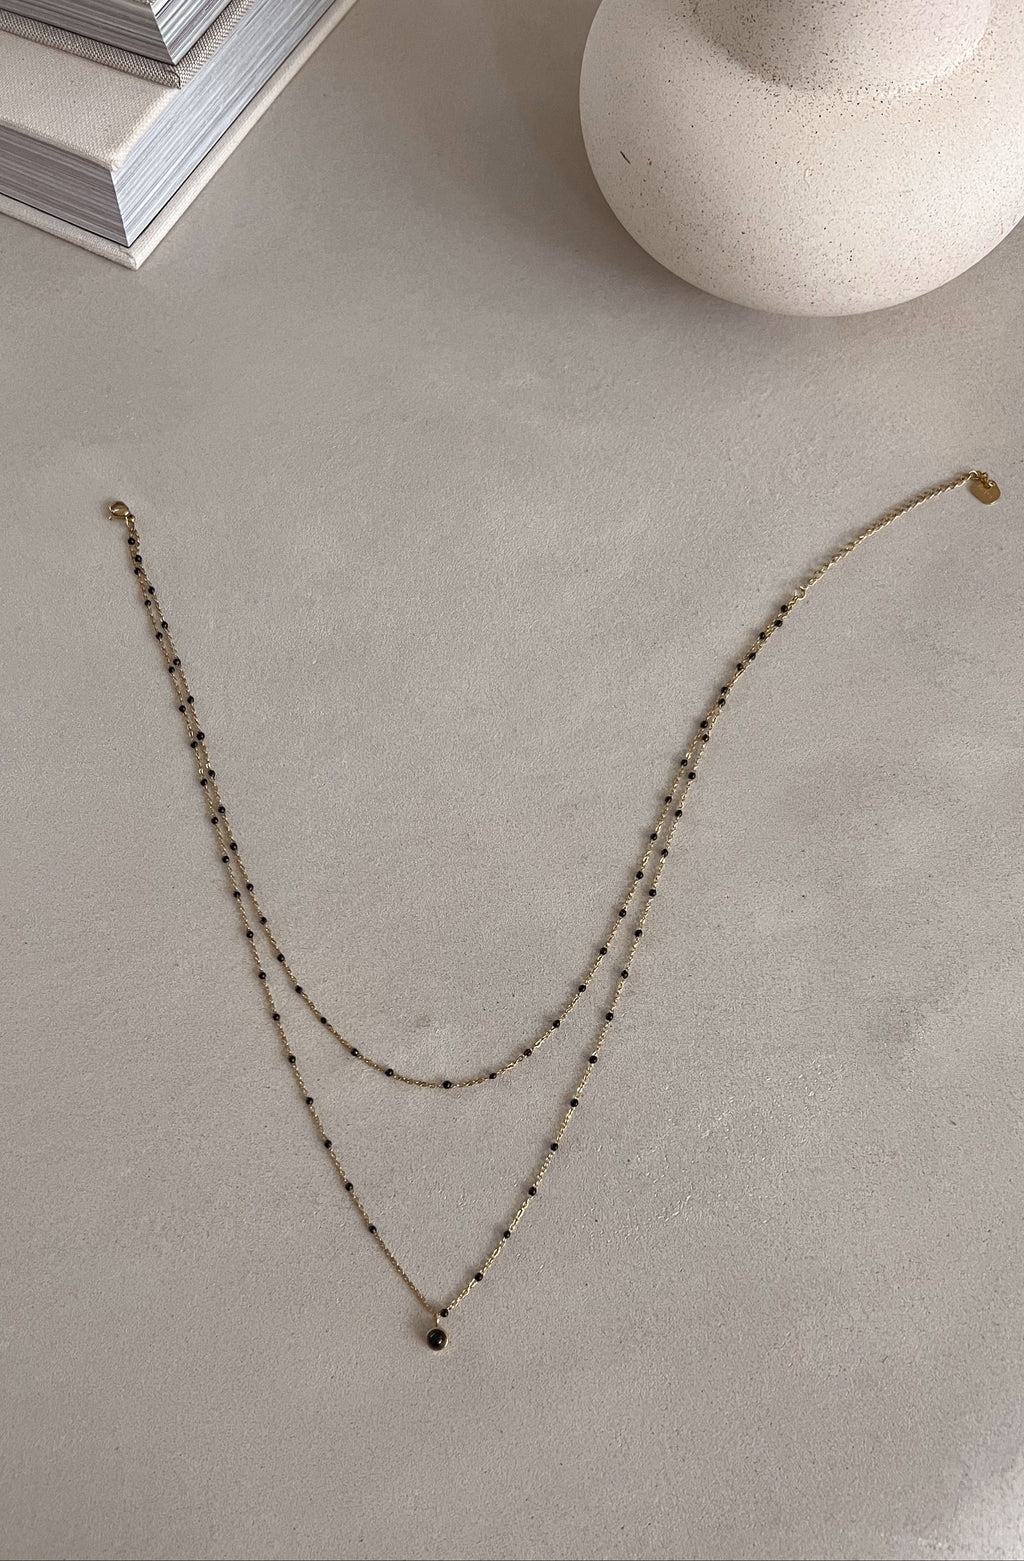 Luam necklace - Black And Golden